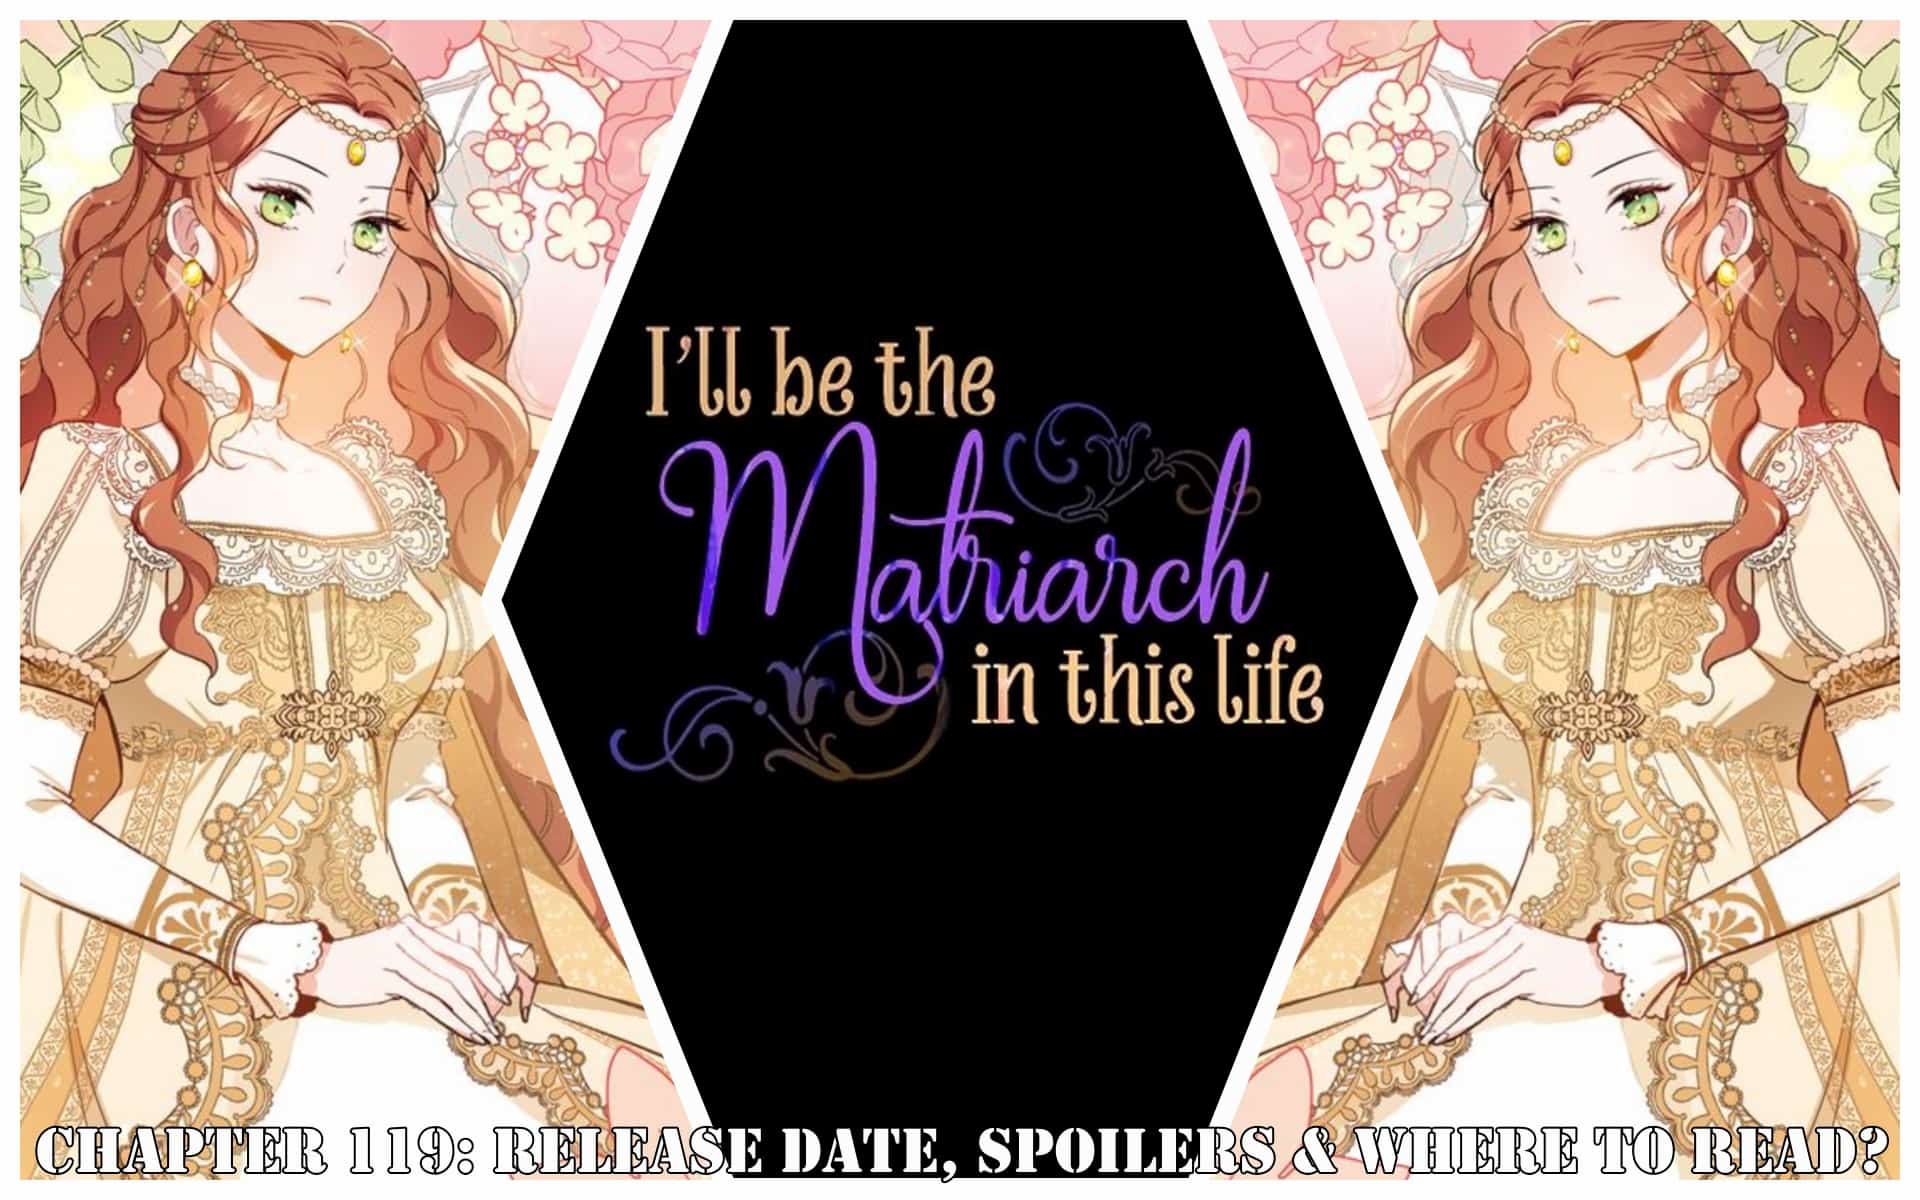 I'll Be The Matriarch In This Life Chapter 119: Release Date, Spoilers & Where to Read?